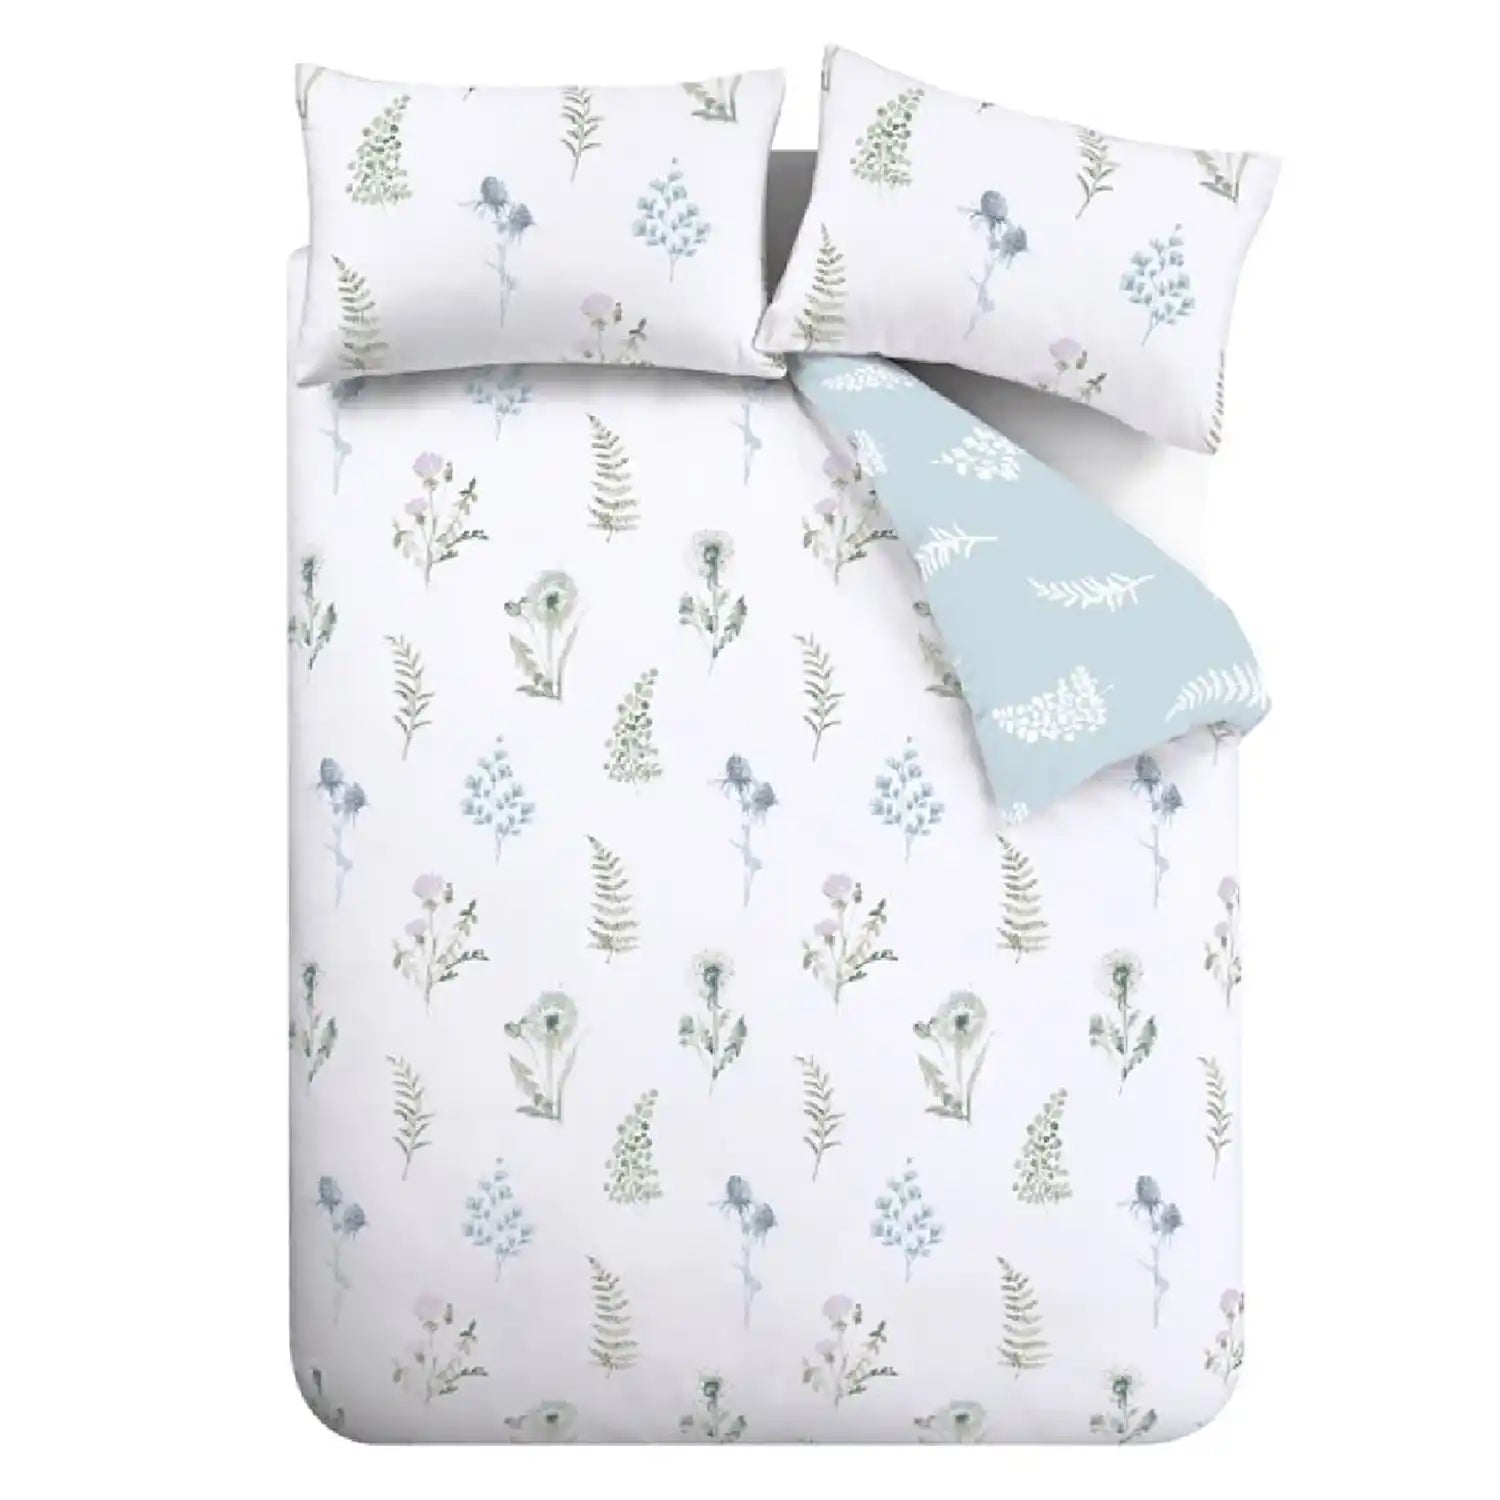  Bianca Meadow Flowers Egyptian Cotton Double Duvet Cover Set with Pillowcases White 5 Shaws Department Stores